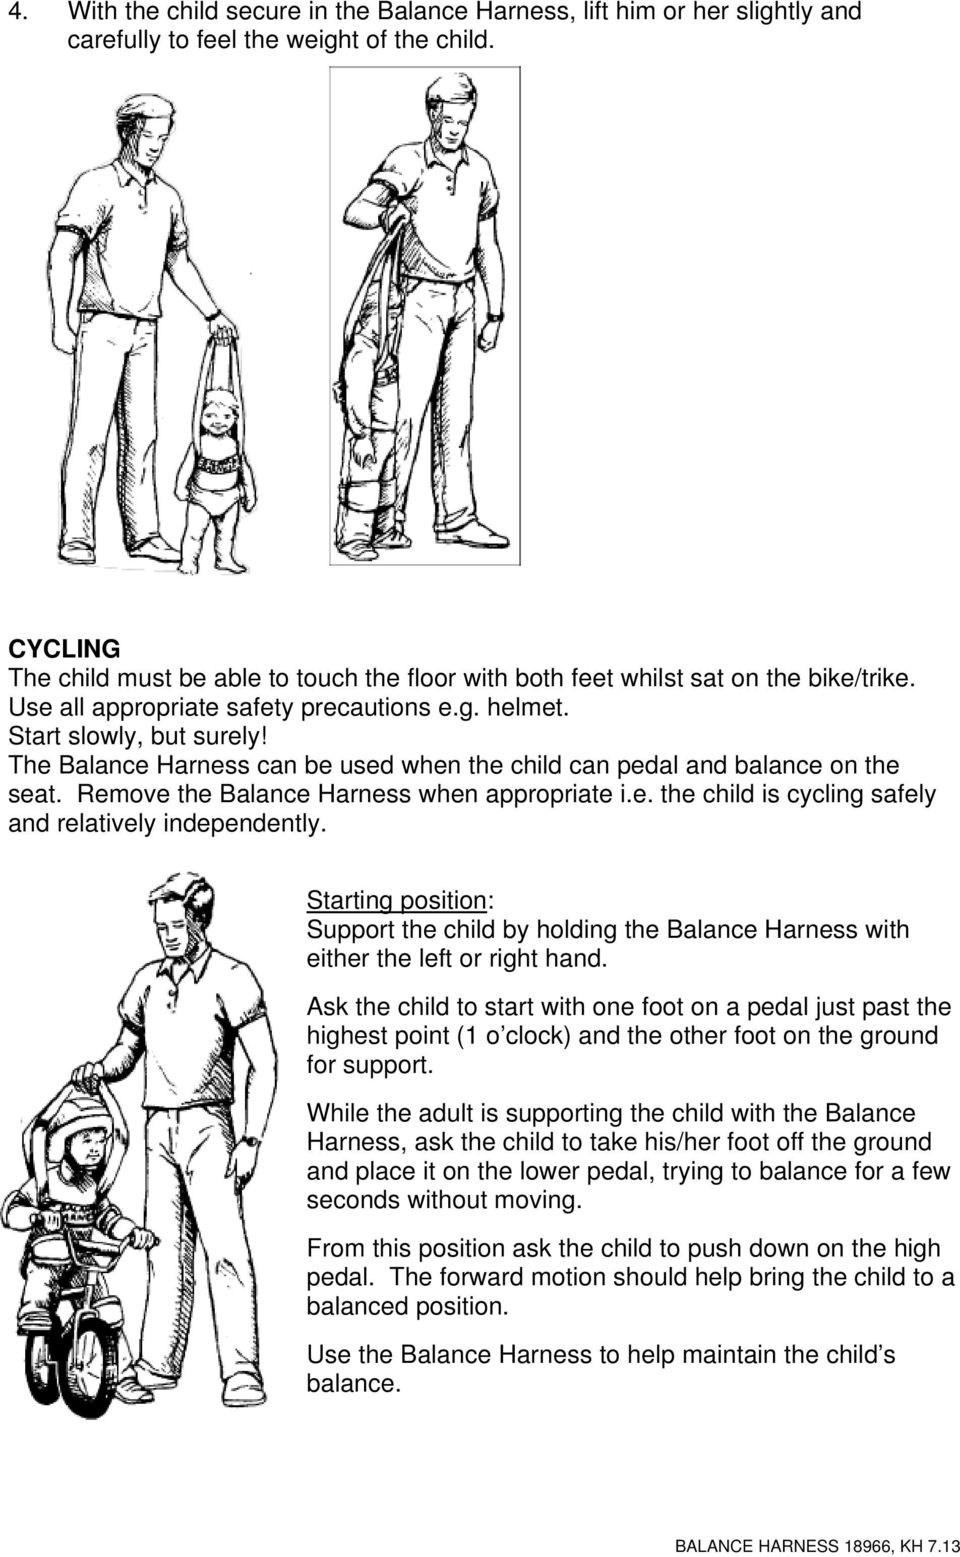 The Balance Harness can be used when the child can pedal and balance on the seat. Remove the Balance Harness when appropriate i.e. the child is cycling safely and relatively independently.